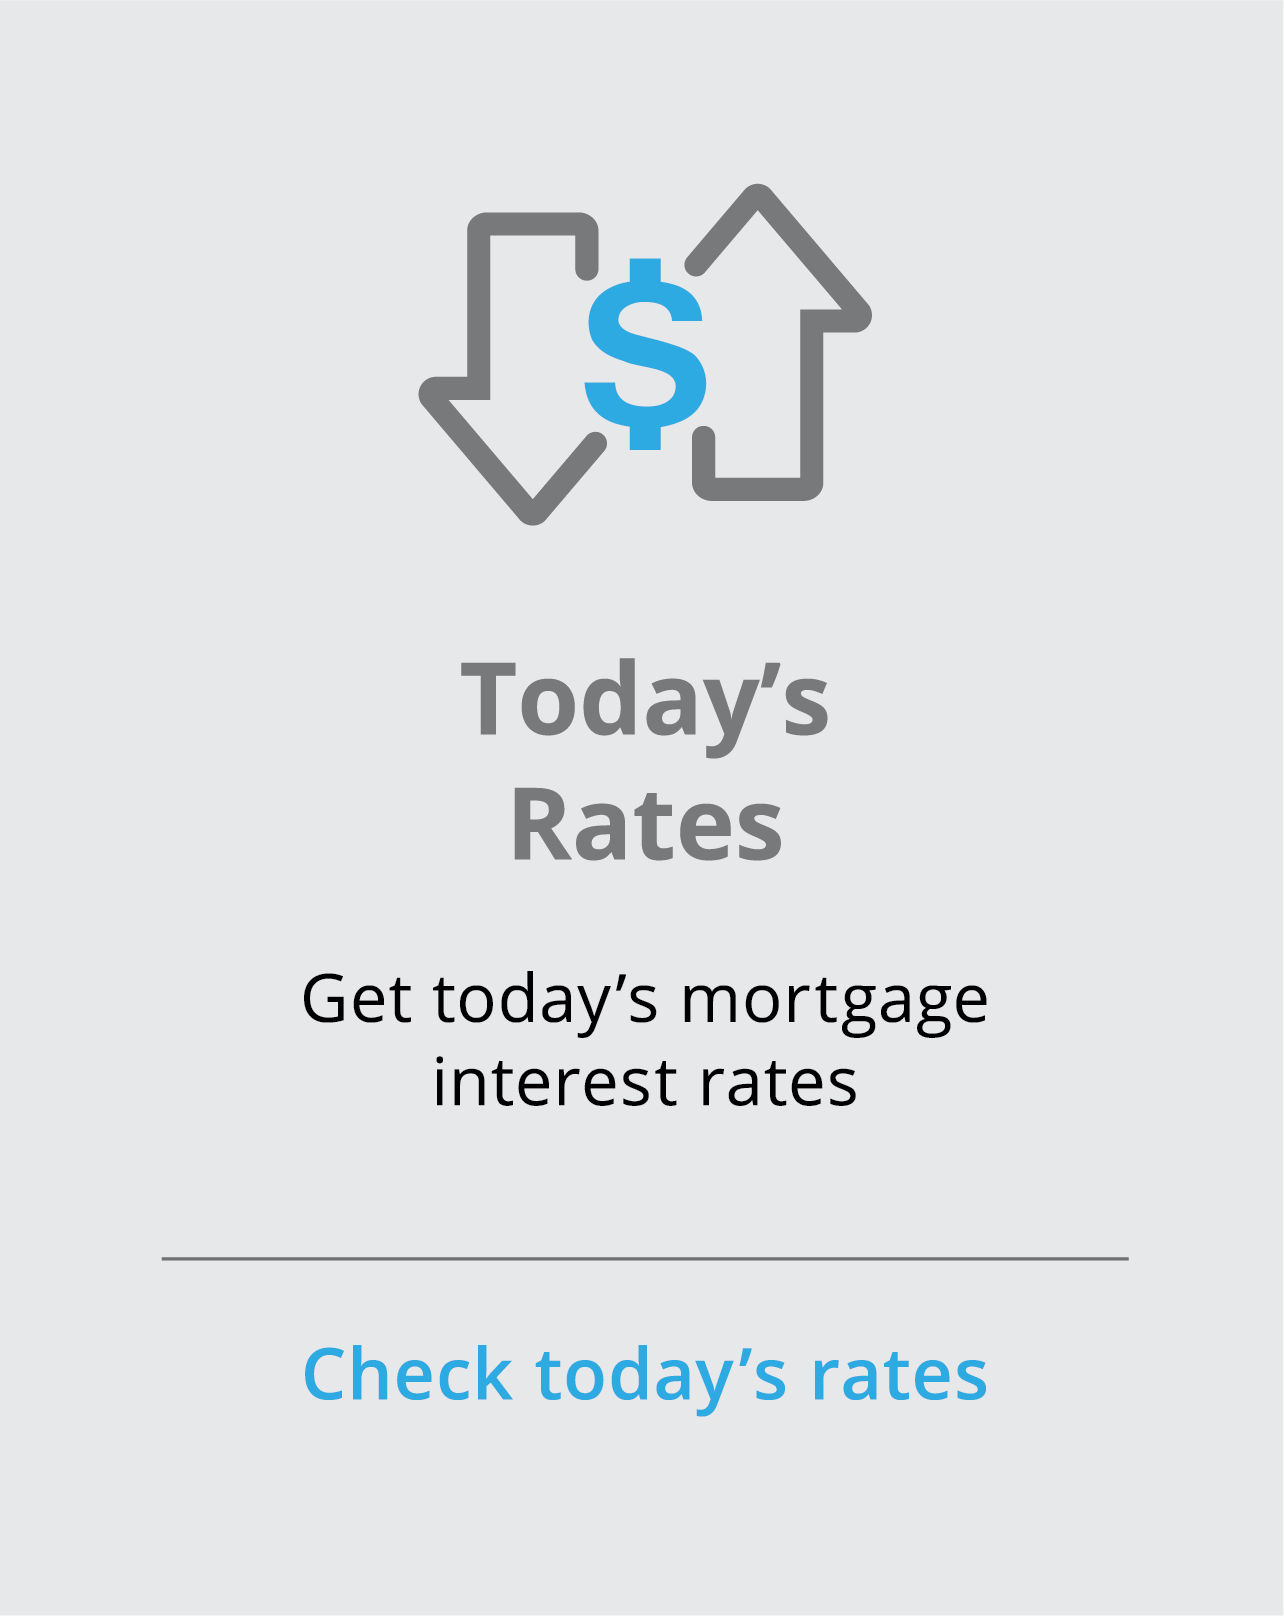 Today's Rates